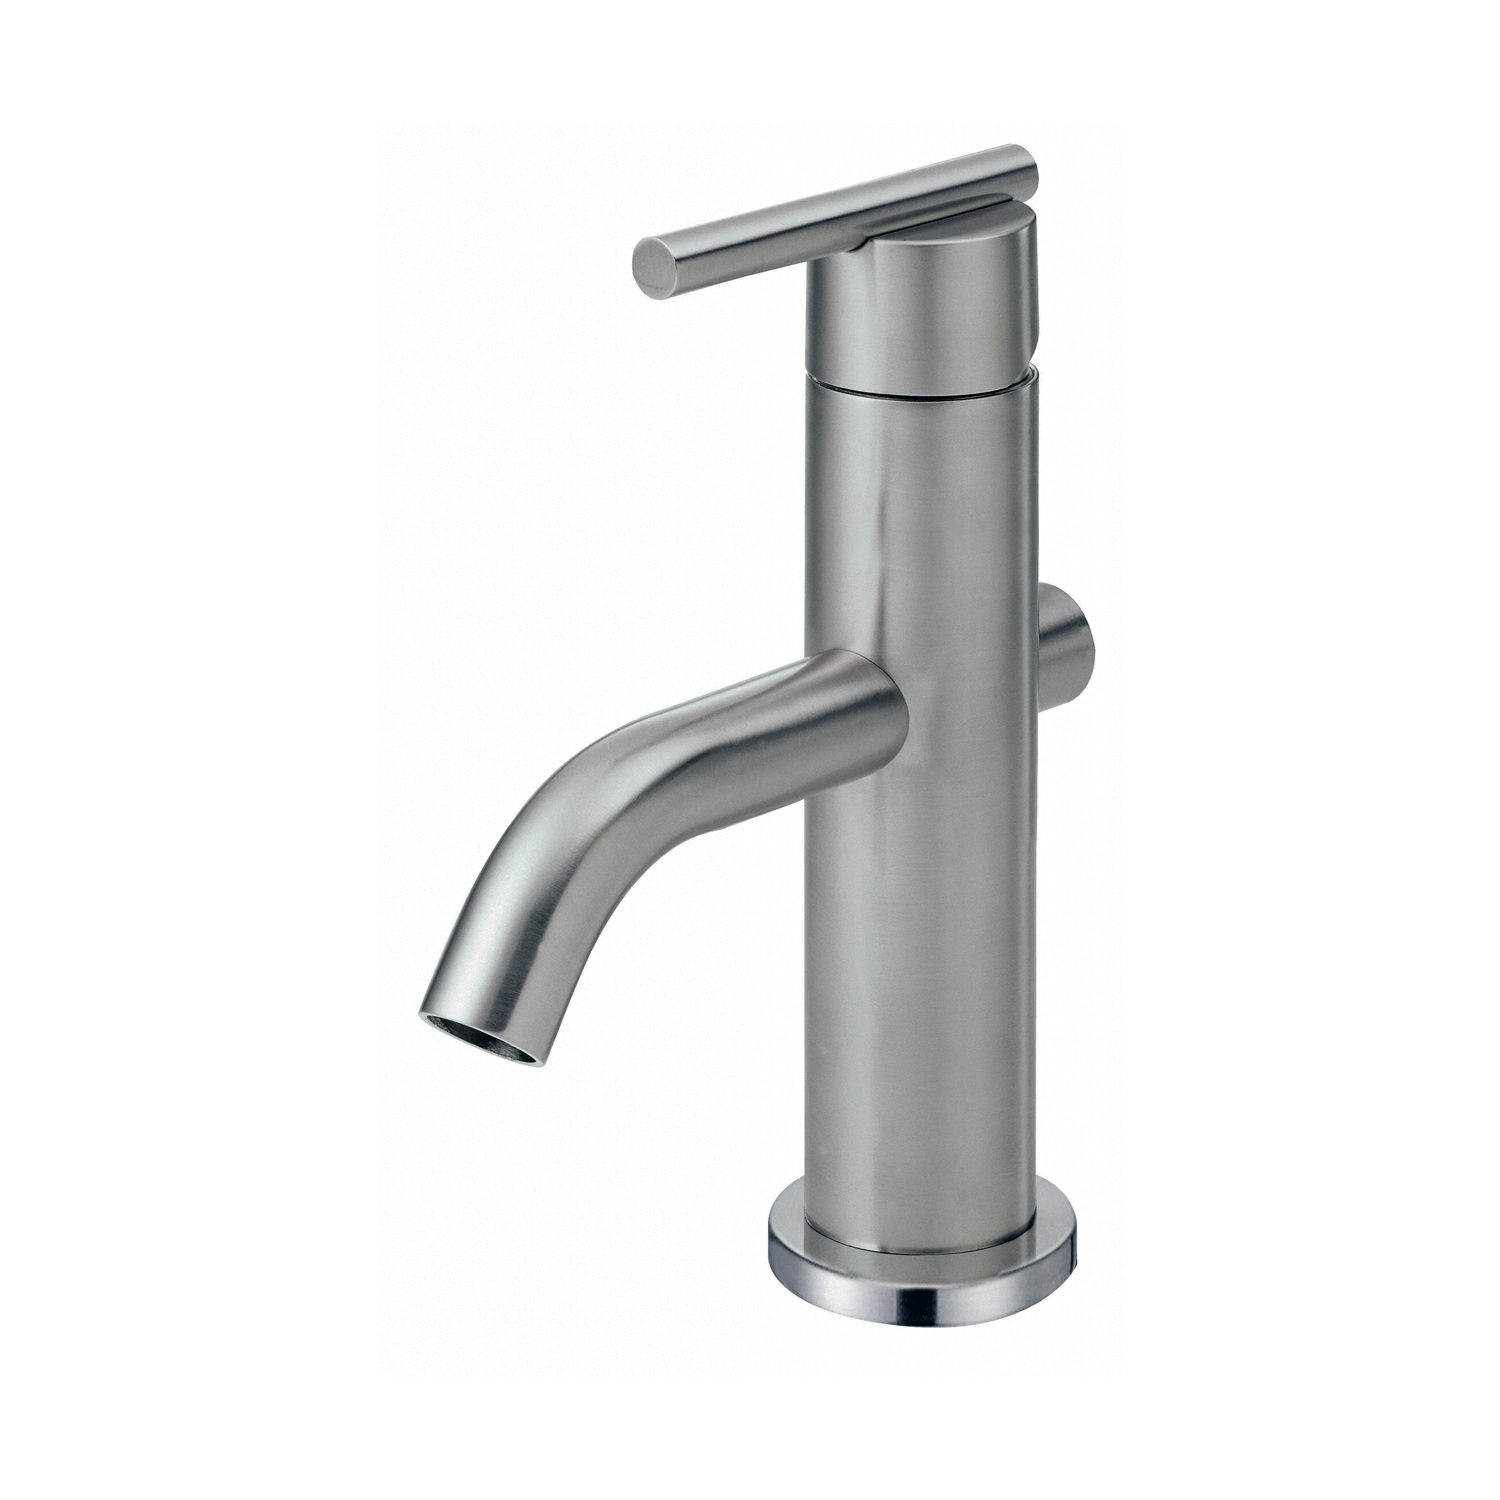 Danze D236158BN Parma 1H Lavatory Faucet w/ Metal Touch Down Drain & Optional Deck Plate Included - Brushed Nickel